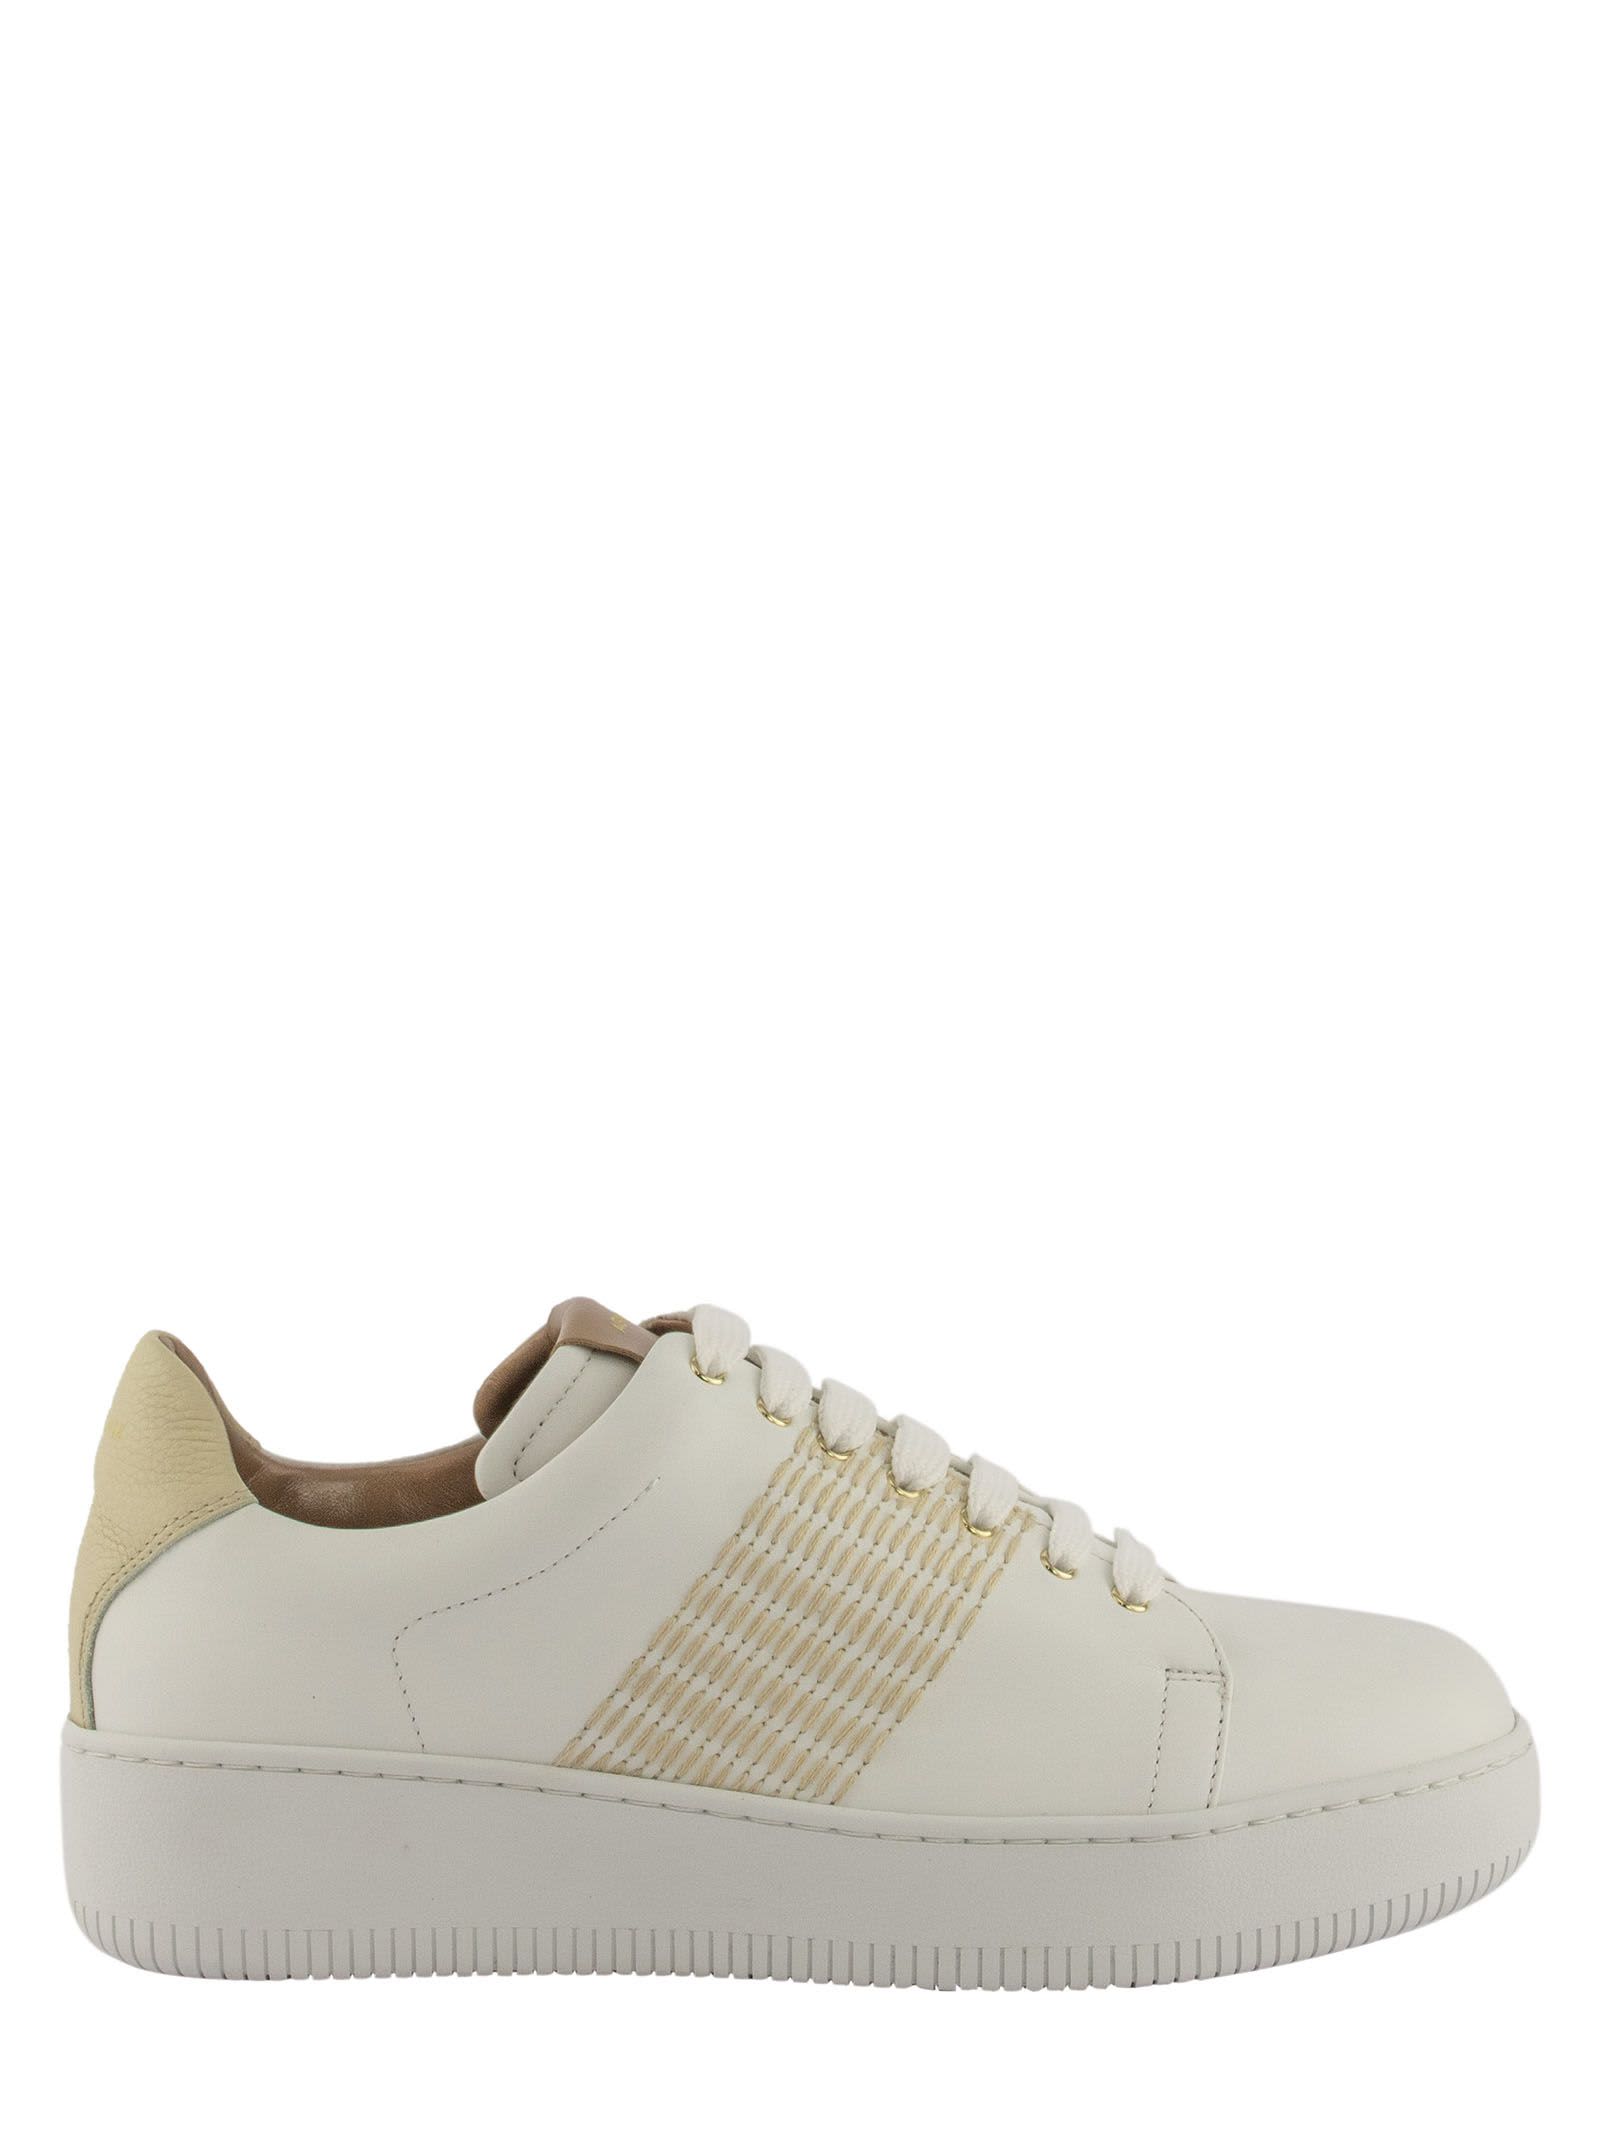 AGNONA NAPPA CALF LEATHER SNEAKERS WITH MOHAIR STITCHING,11211150